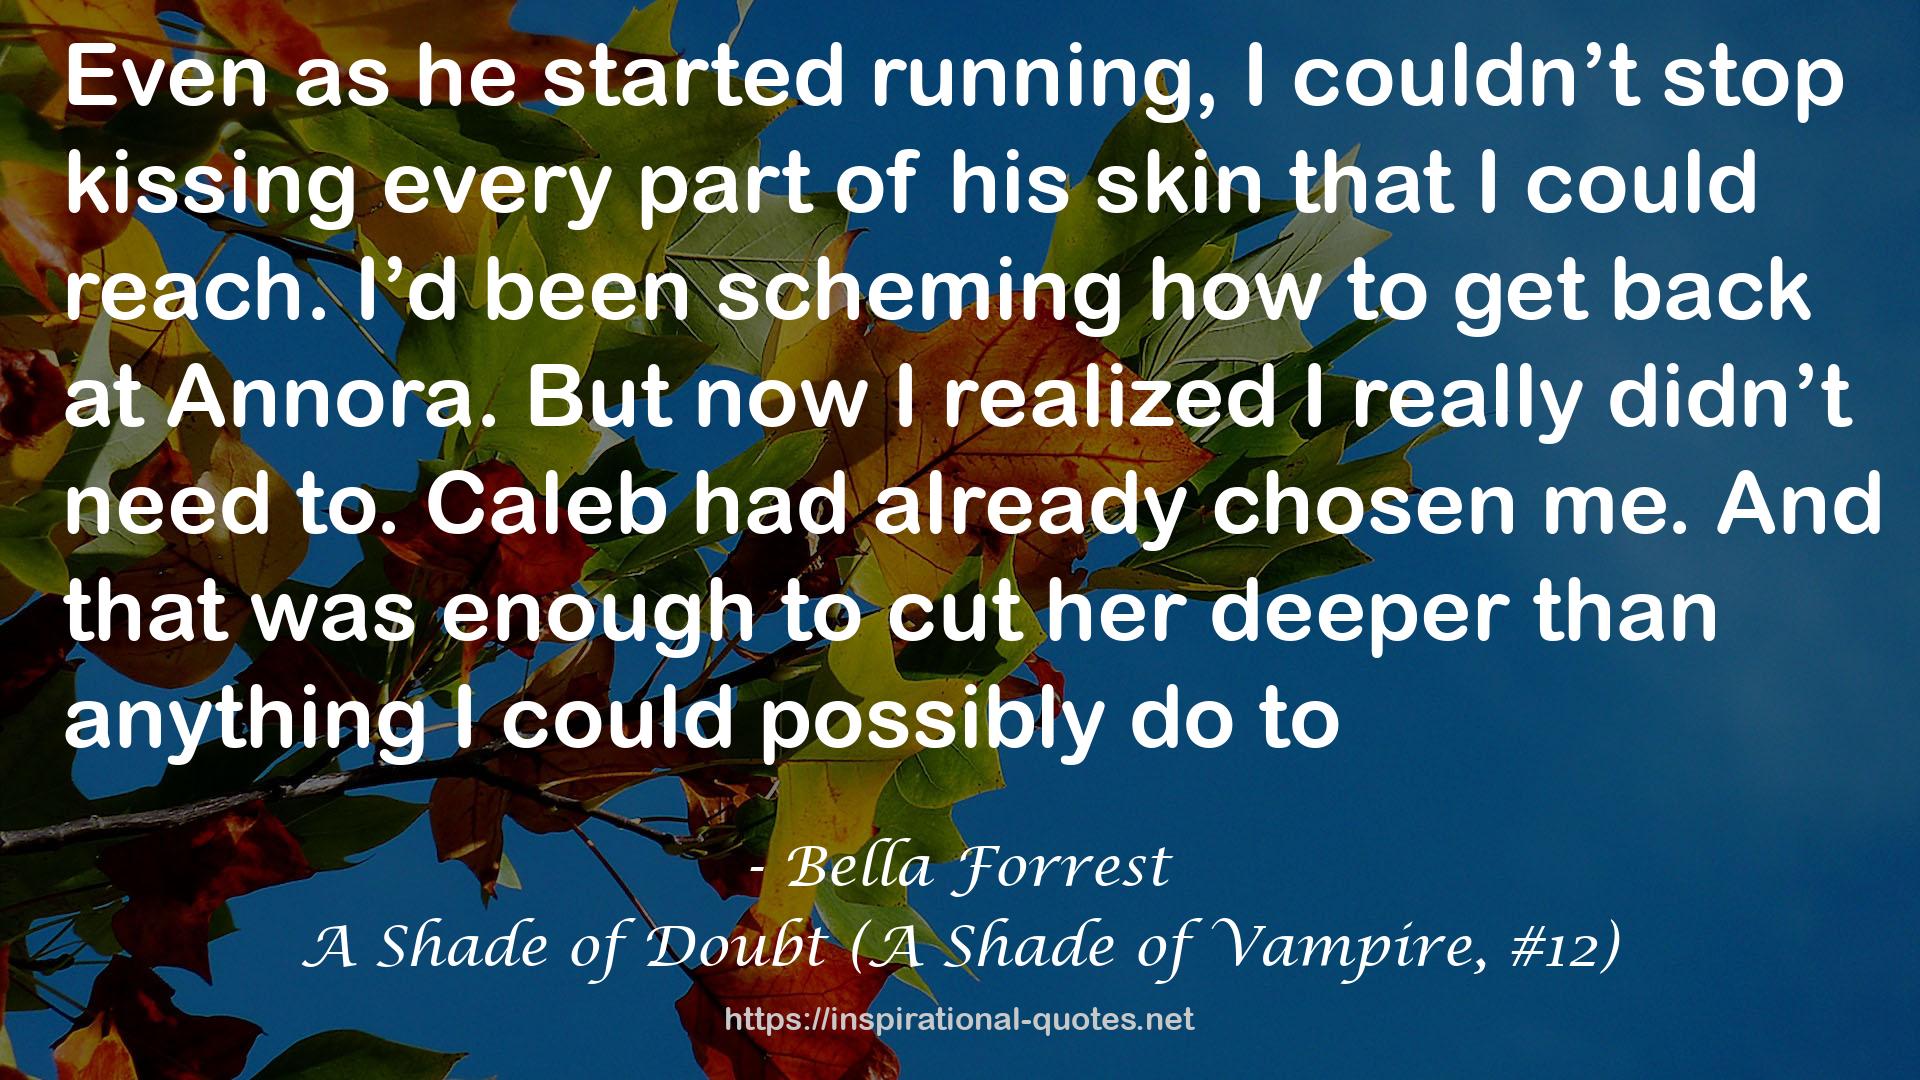 A Shade of Doubt (A Shade of Vampire, #12) QUOTES